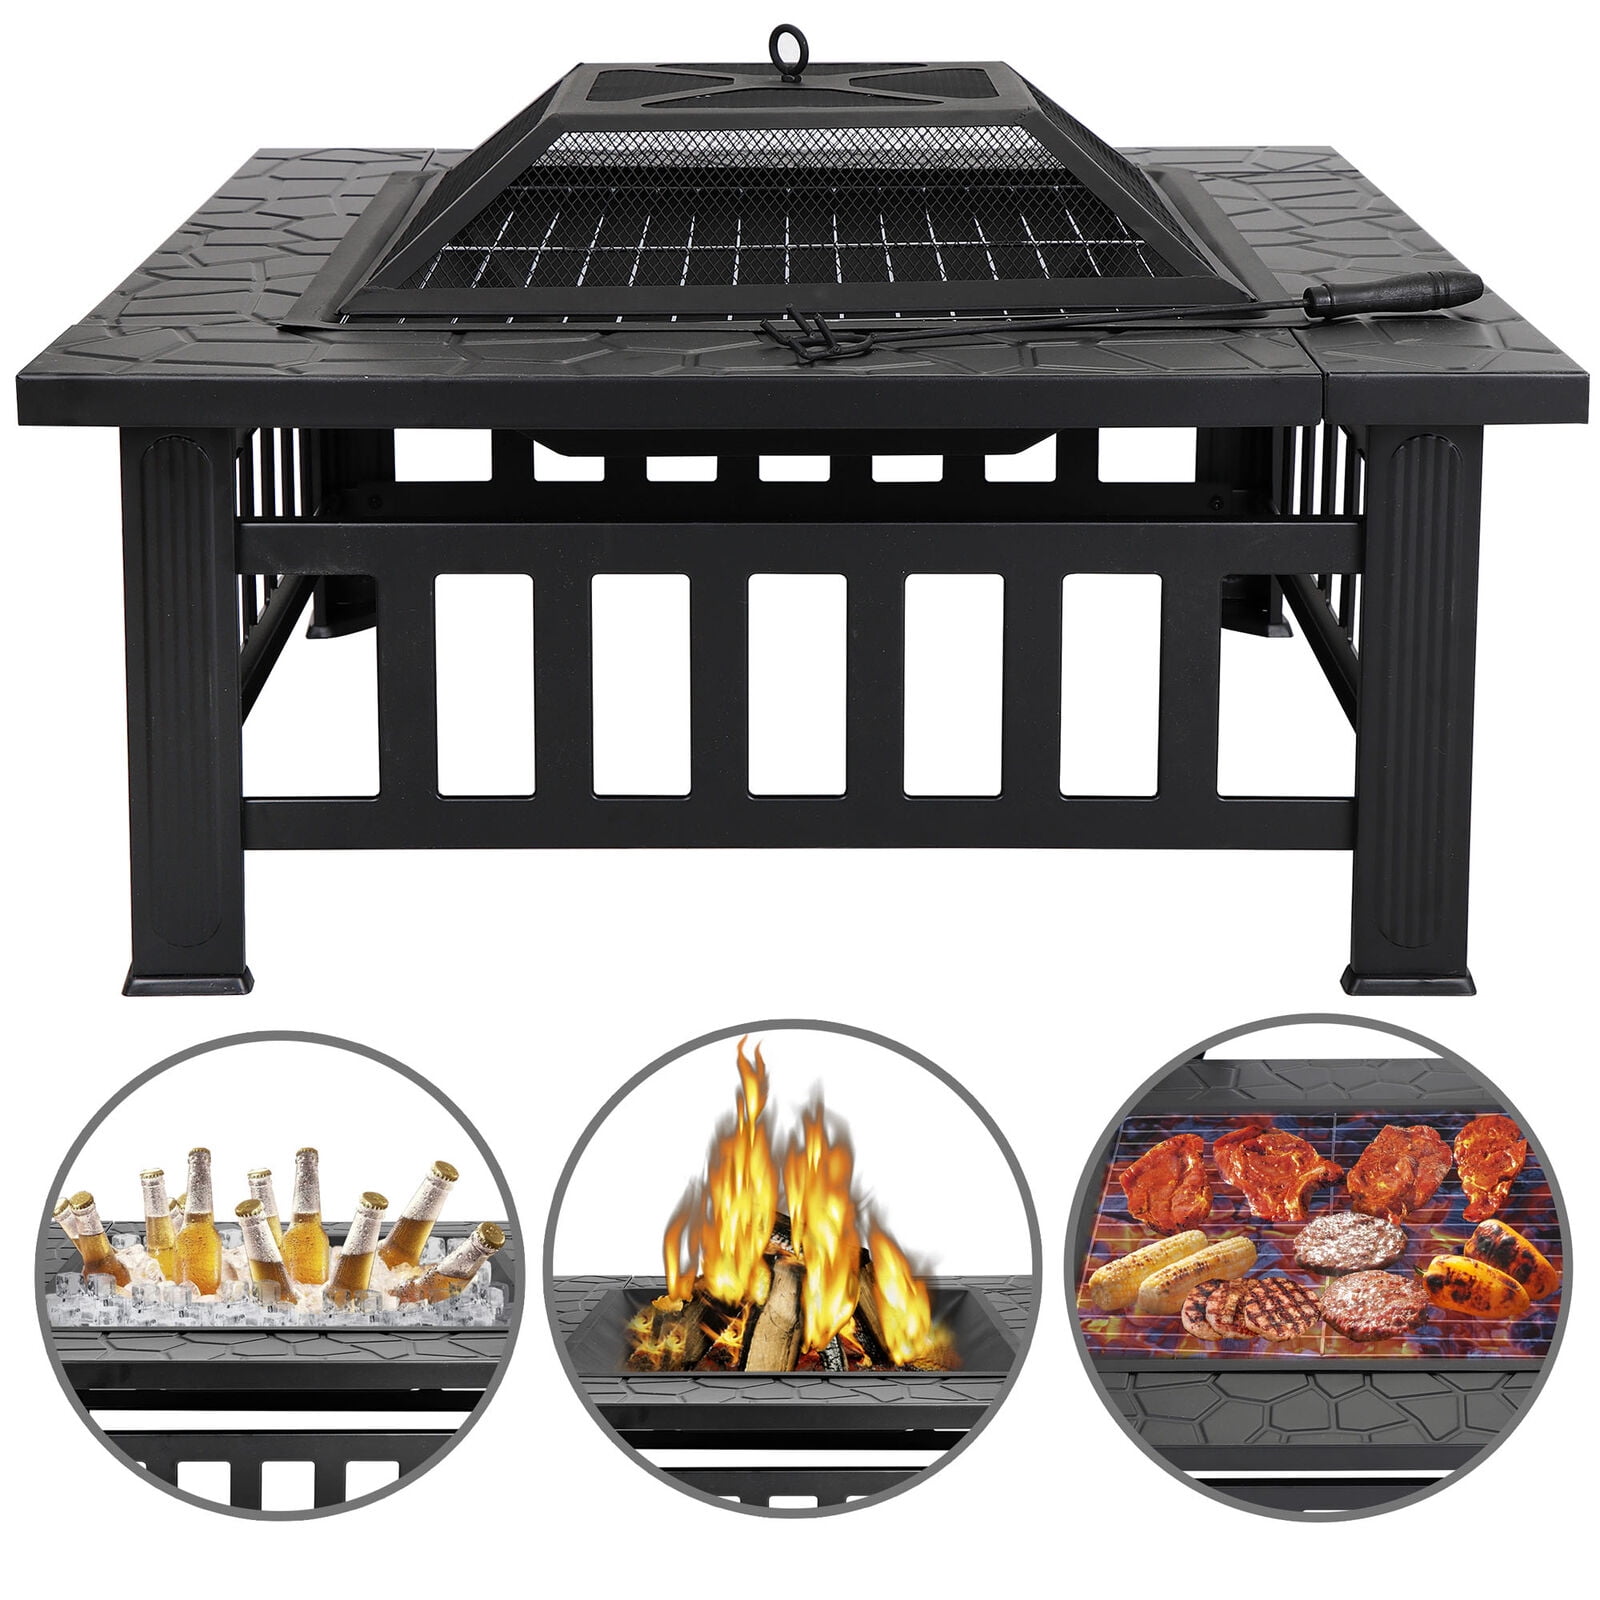 Metal Firepit Backyard 32" Square Patio Garden Stove Fire Pit W/Cover Outdoor